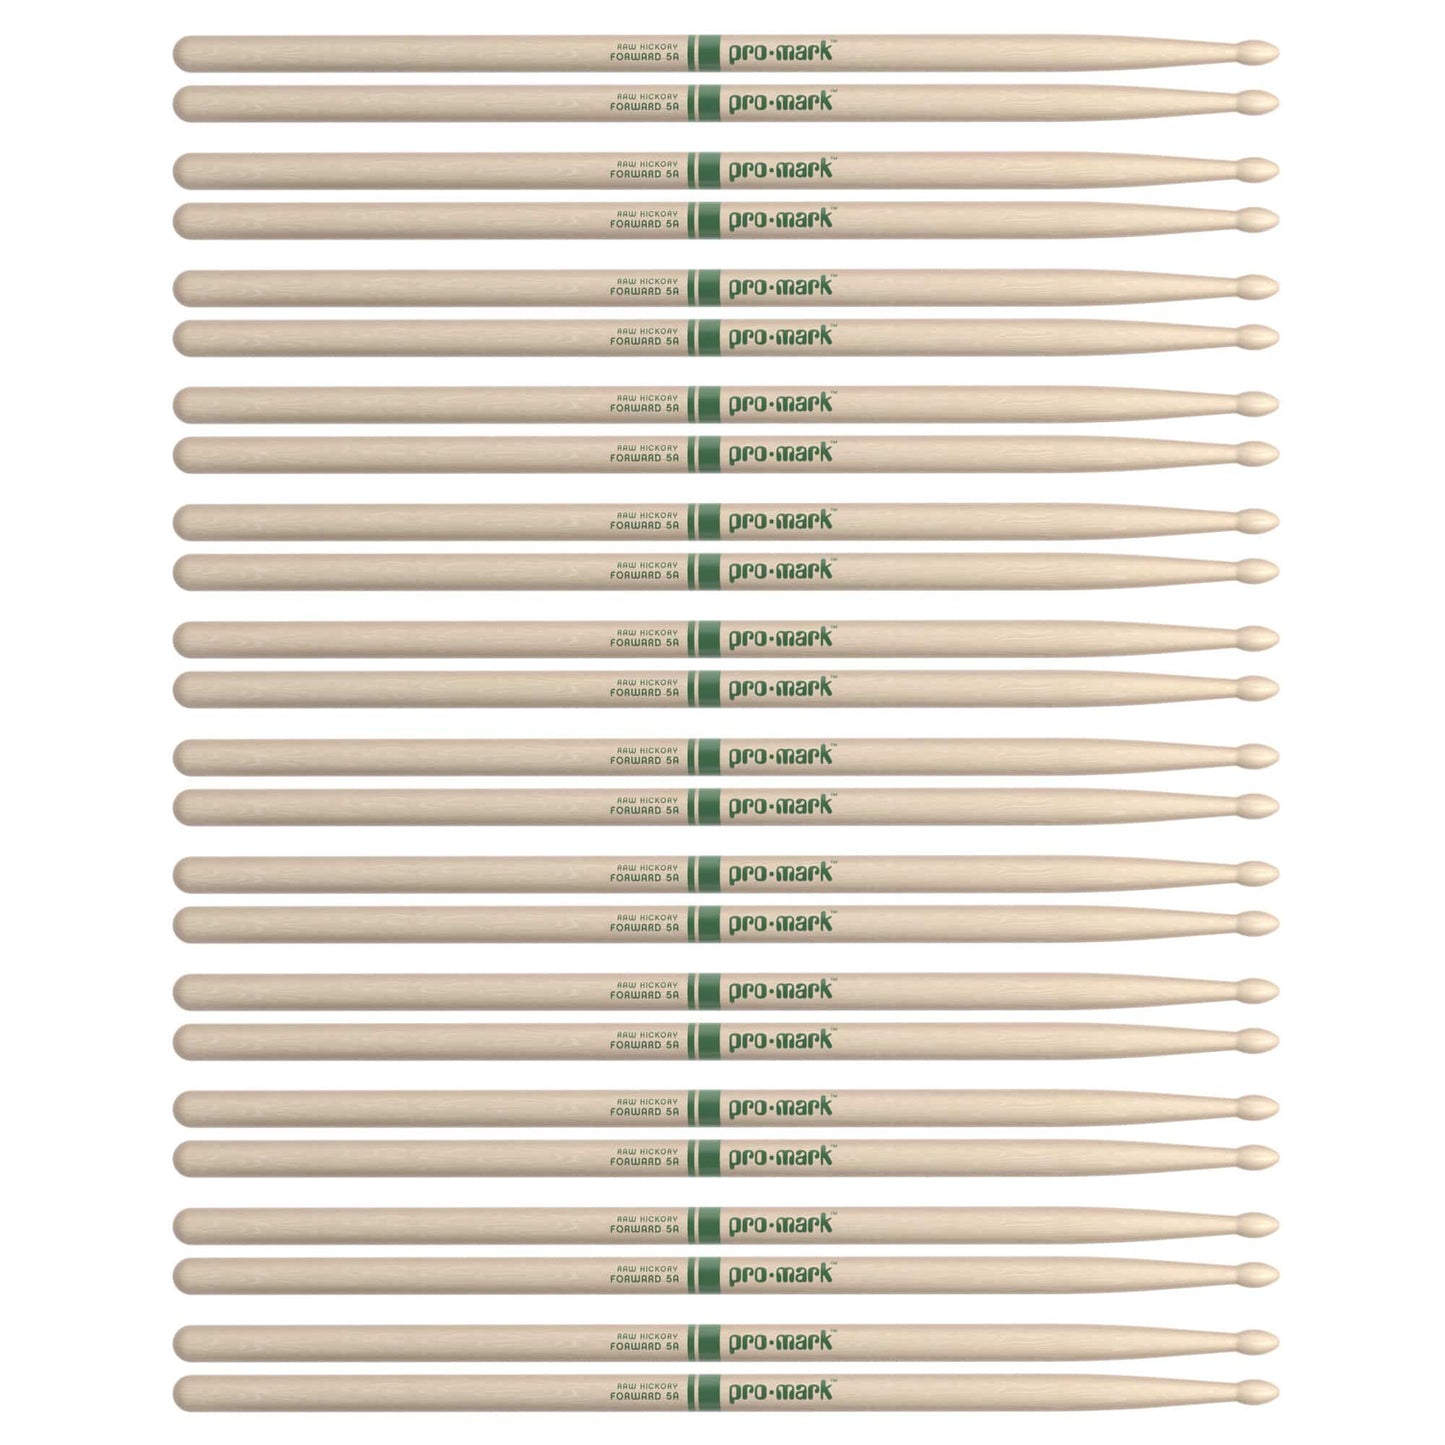 Promark American Hickory 5A Natural Wood Tip Drum Sticks (12 Pair Bundle) Drums and Percussion / Parts and Accessories / Drum Sticks and Mallets